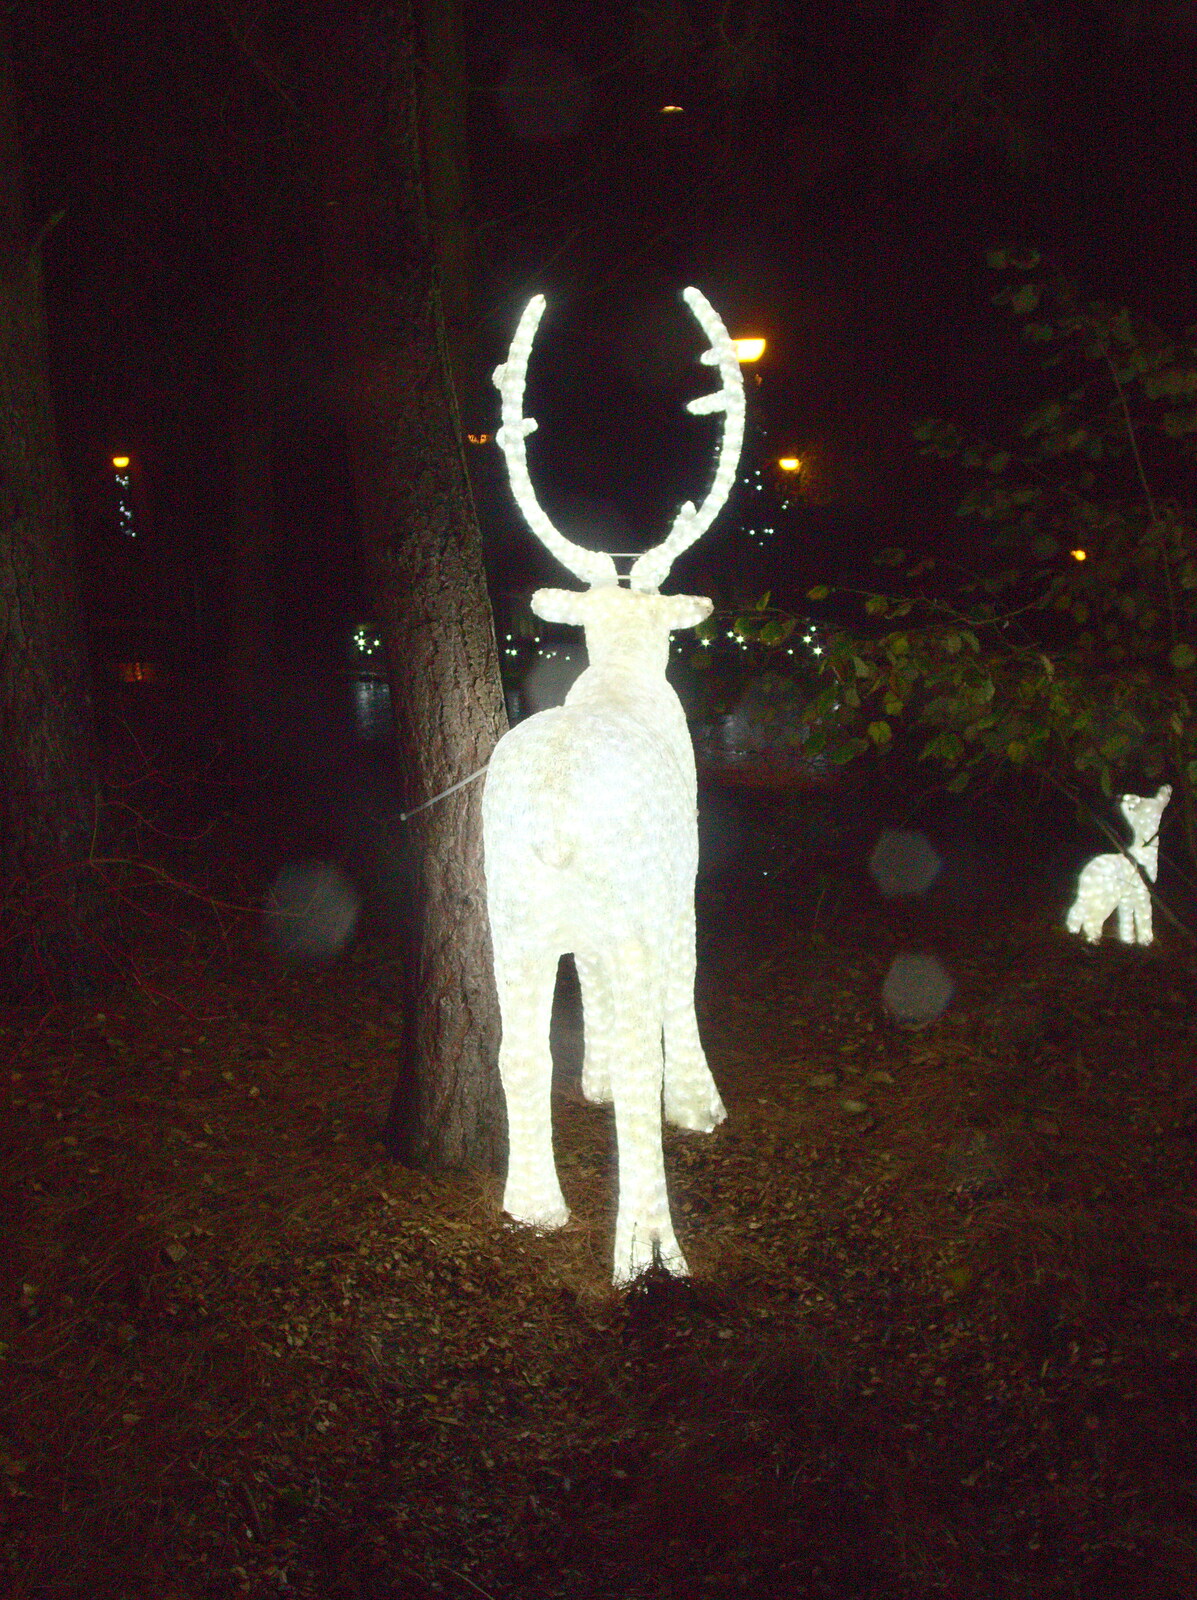 An illuminated reindeer in the dark from The BBs at Centre Parcs, Elvedon, Norfolk - 5th November 2015